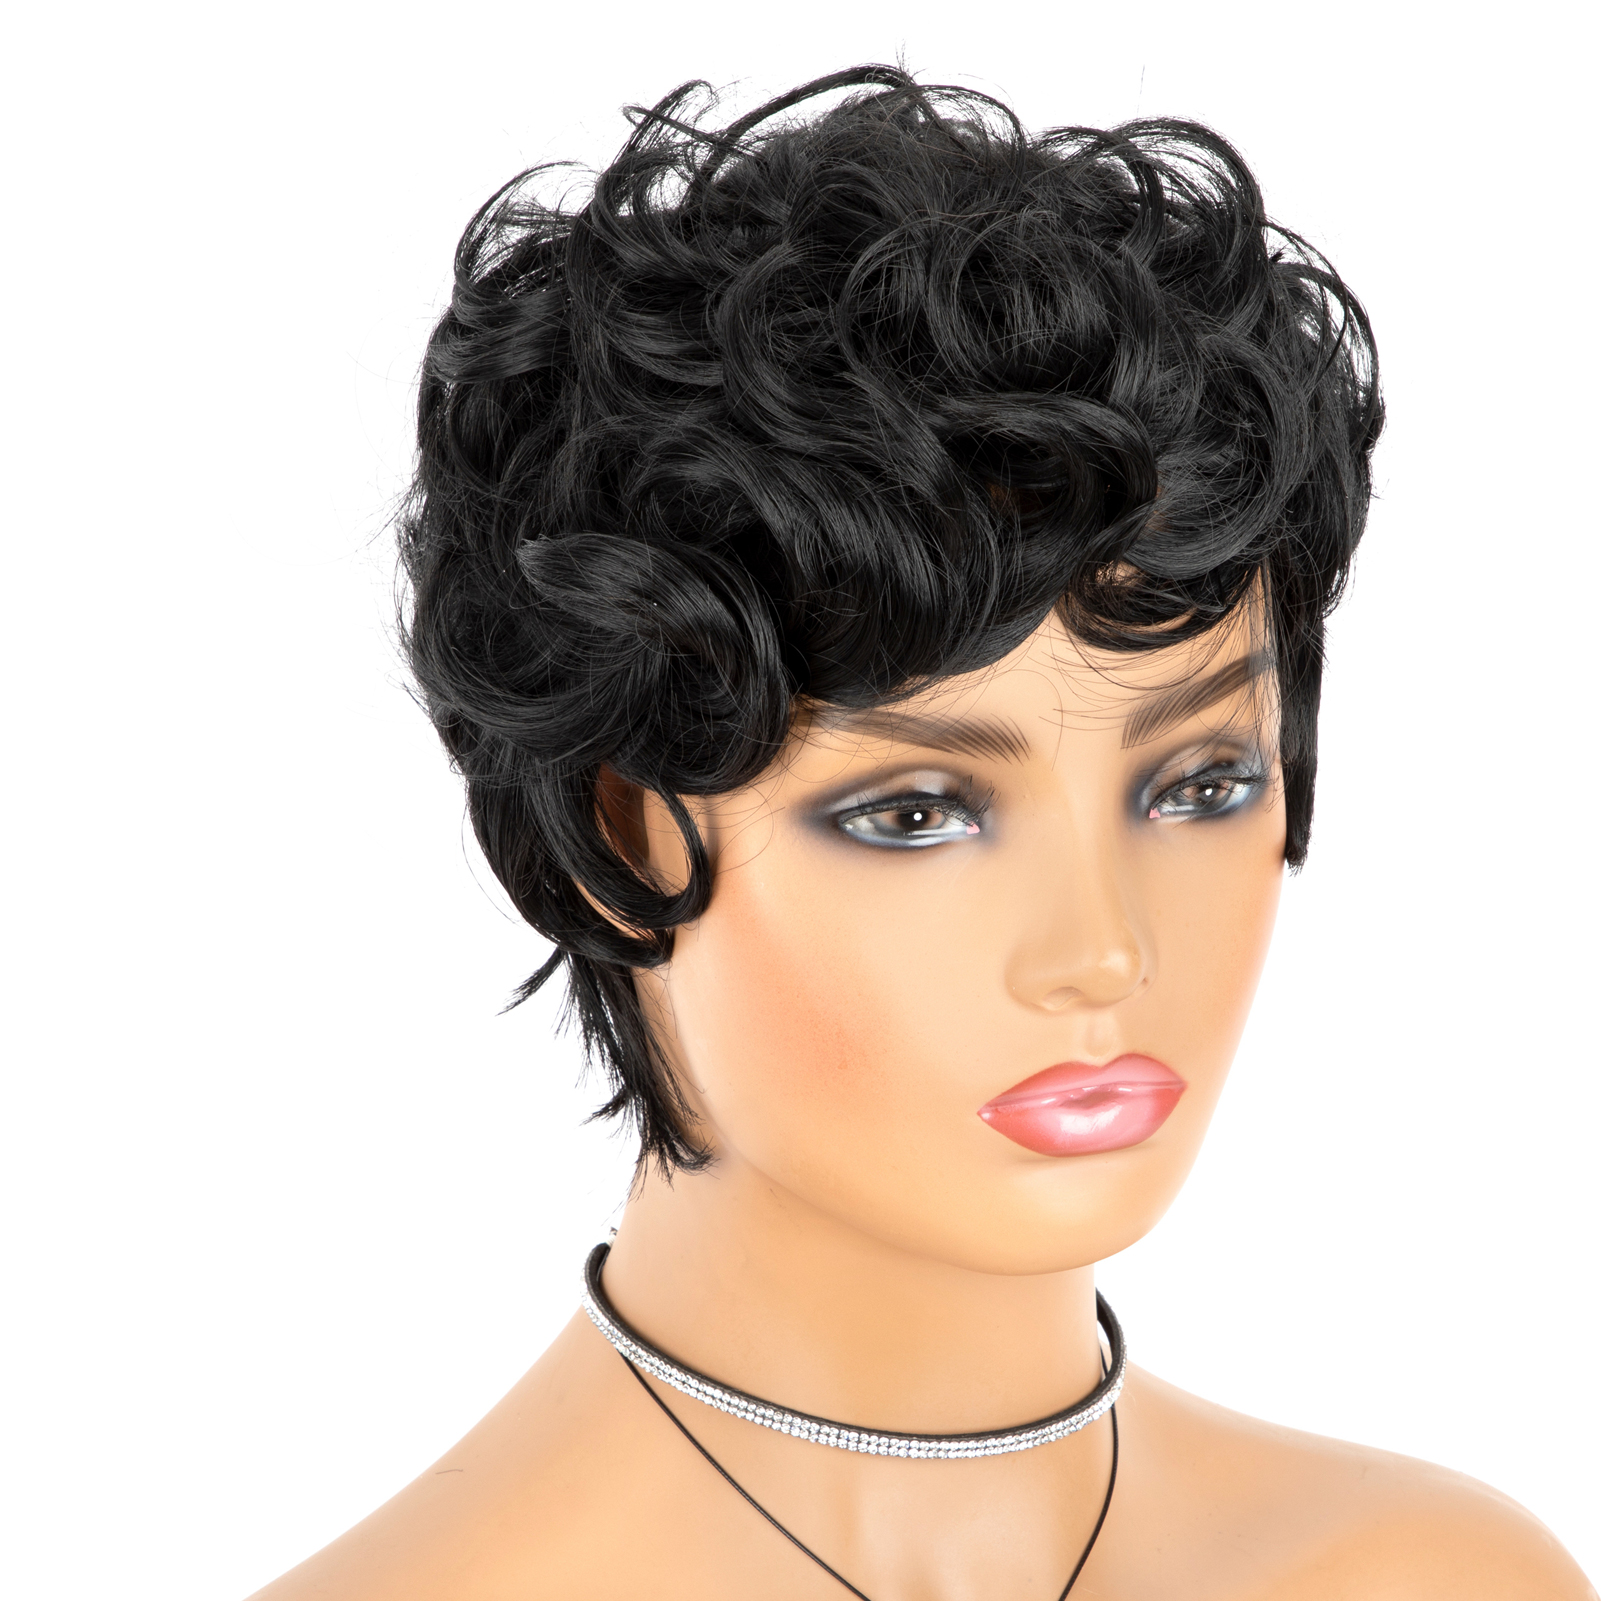 Short Pixie Cut Wig Hair Natural Synthetic Wigs For Women Heat Resistant Wig Natural Hair Women's Fashion Wig